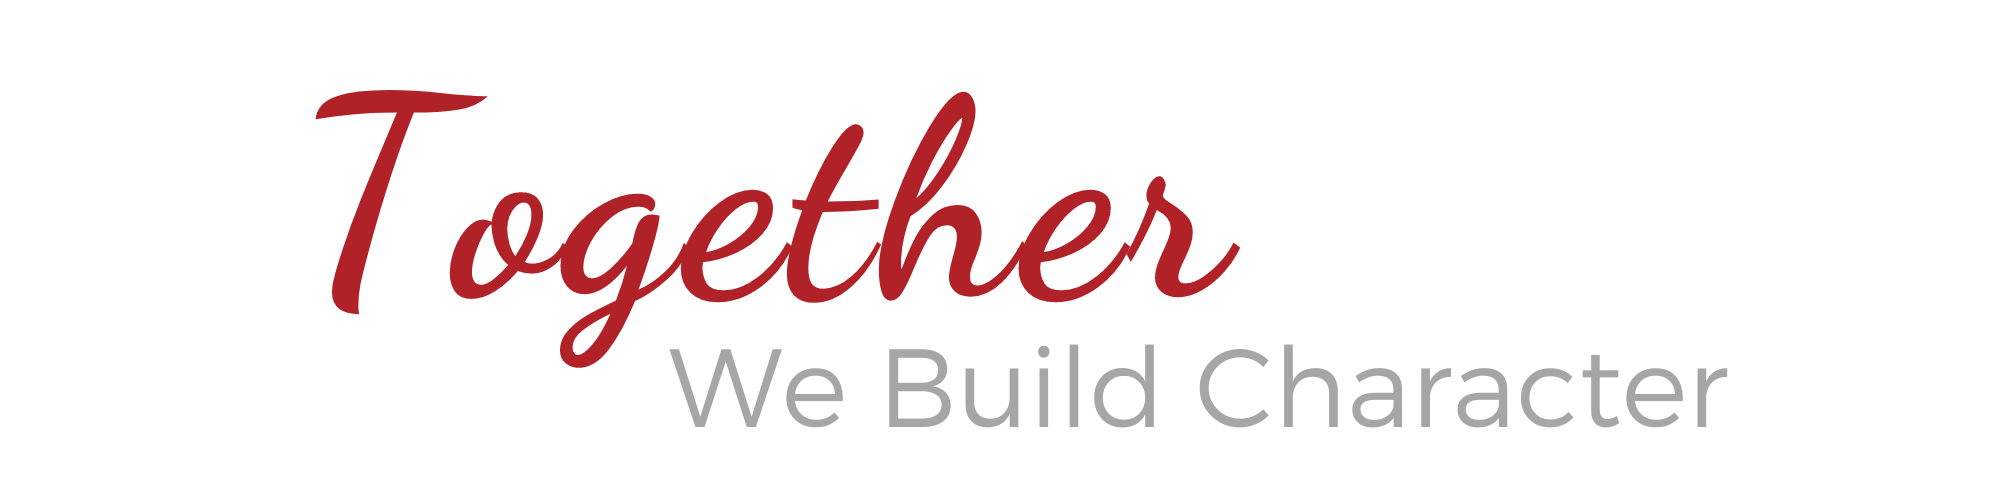 Image - Together We Build Character 